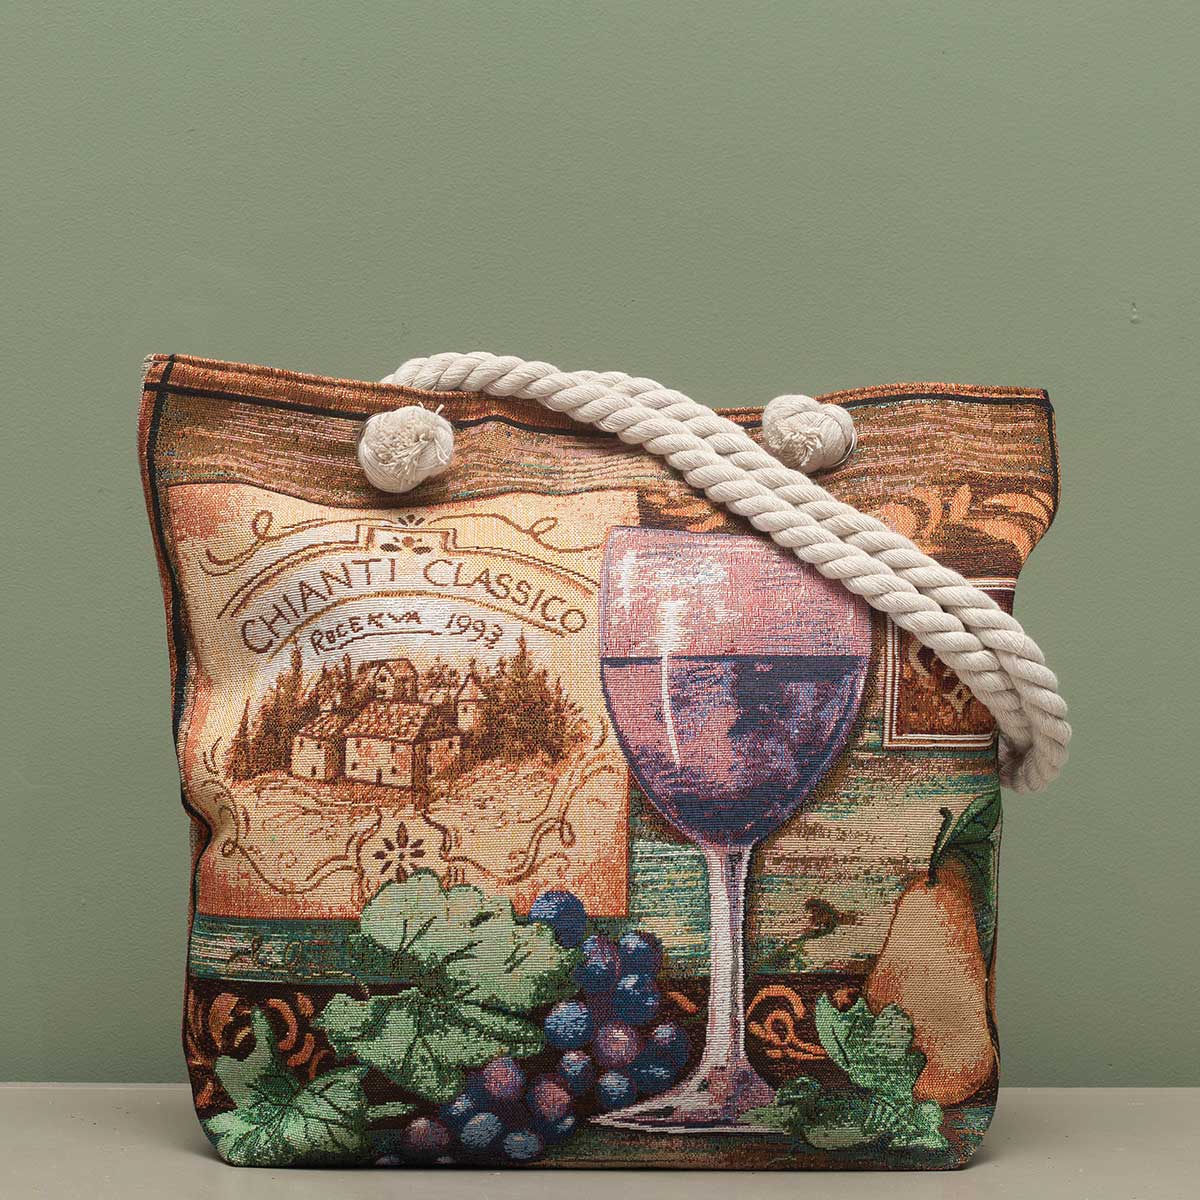 Chianti Tapestry Bag 17.5"x5"x14" with 10" Shoulder Strap